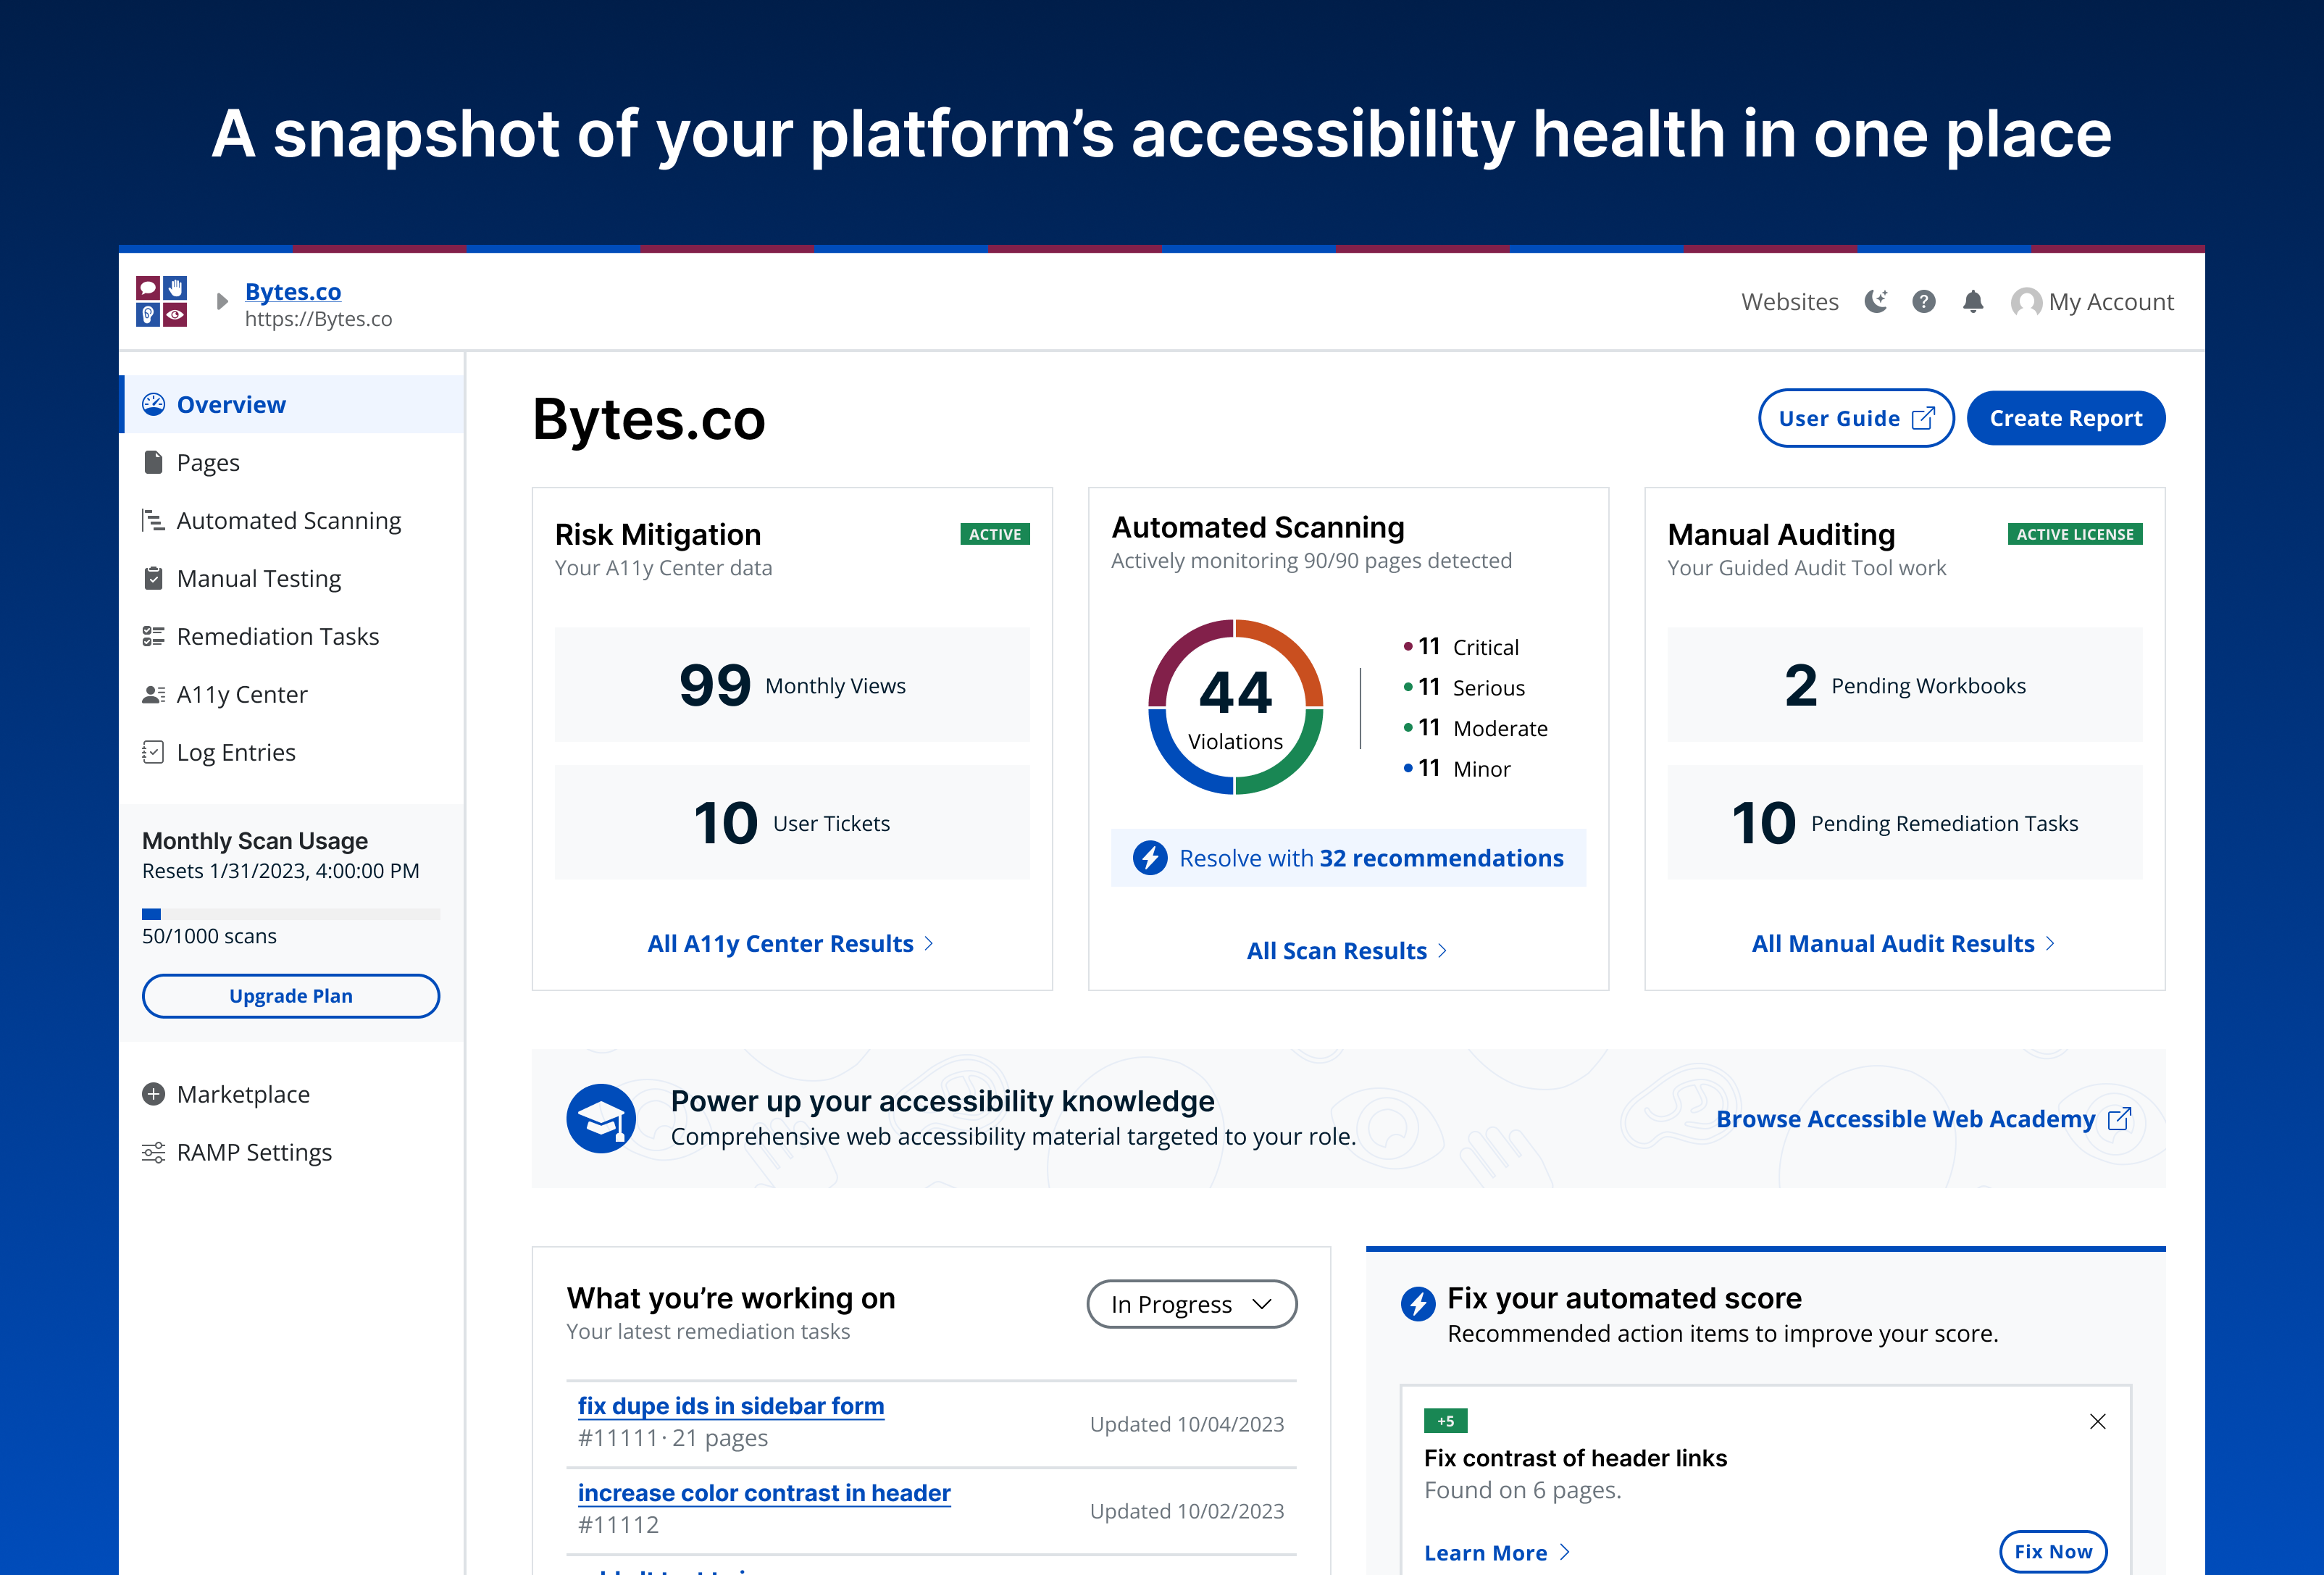 "A snapshot of your platform's accessibility health in one place." The Overview tab highlighting the main components of web accessibility, Risk Mitigation, Automated Scanning, Manual Auditing, and includes recommendations on next steps.